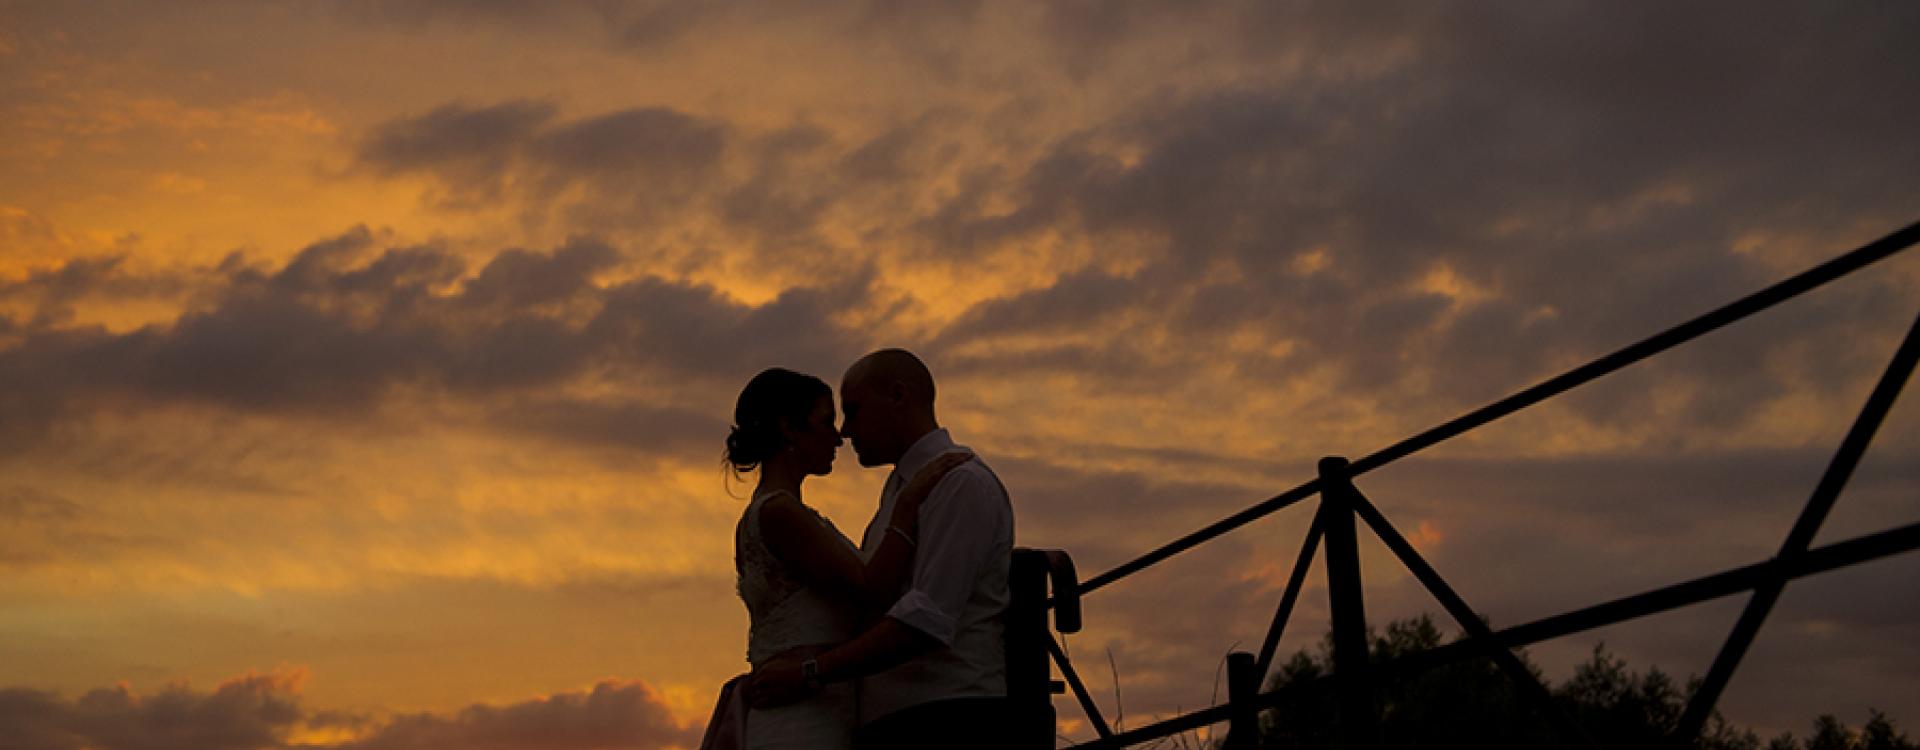 wedding couple silhouetted against sunset